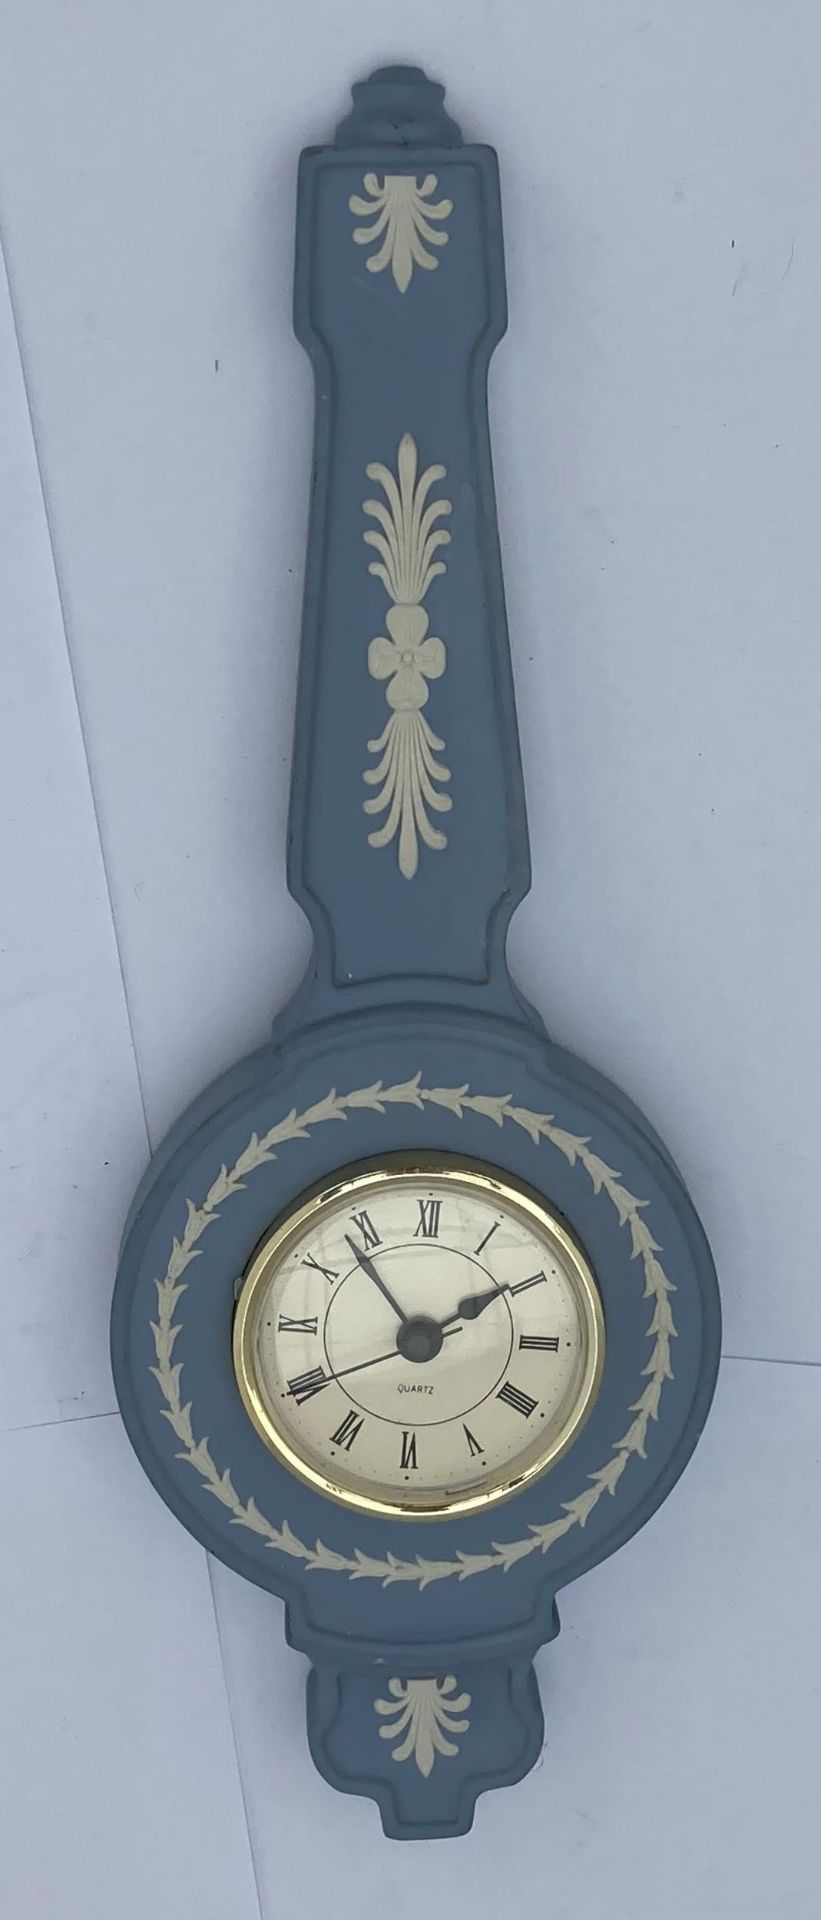 A WEDGWOOD PALE BLUE JASPERWARE CLOCK IN THE FORM OF A BAROMETER